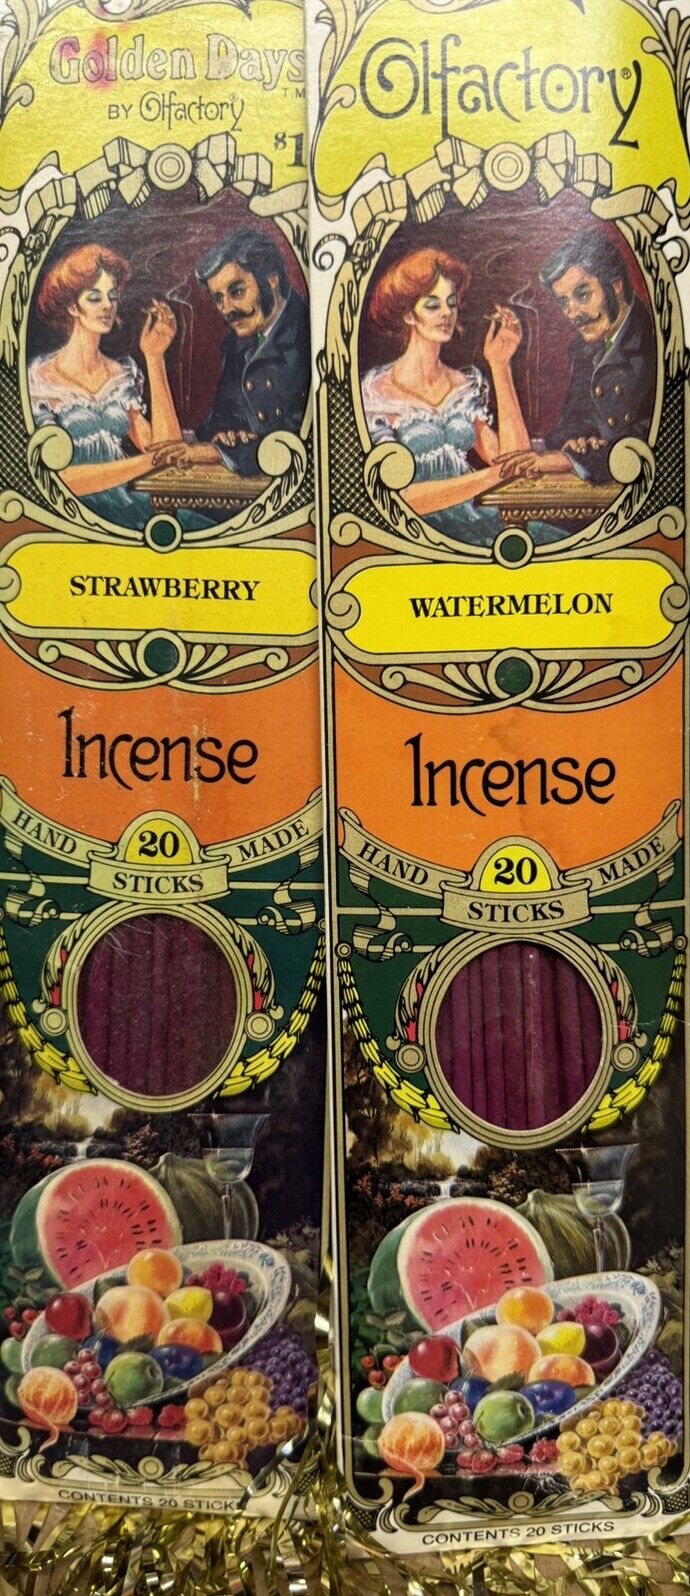 Set of 2 packs watermelon and strawberry Olfactory corp 40 sticks 70's unused